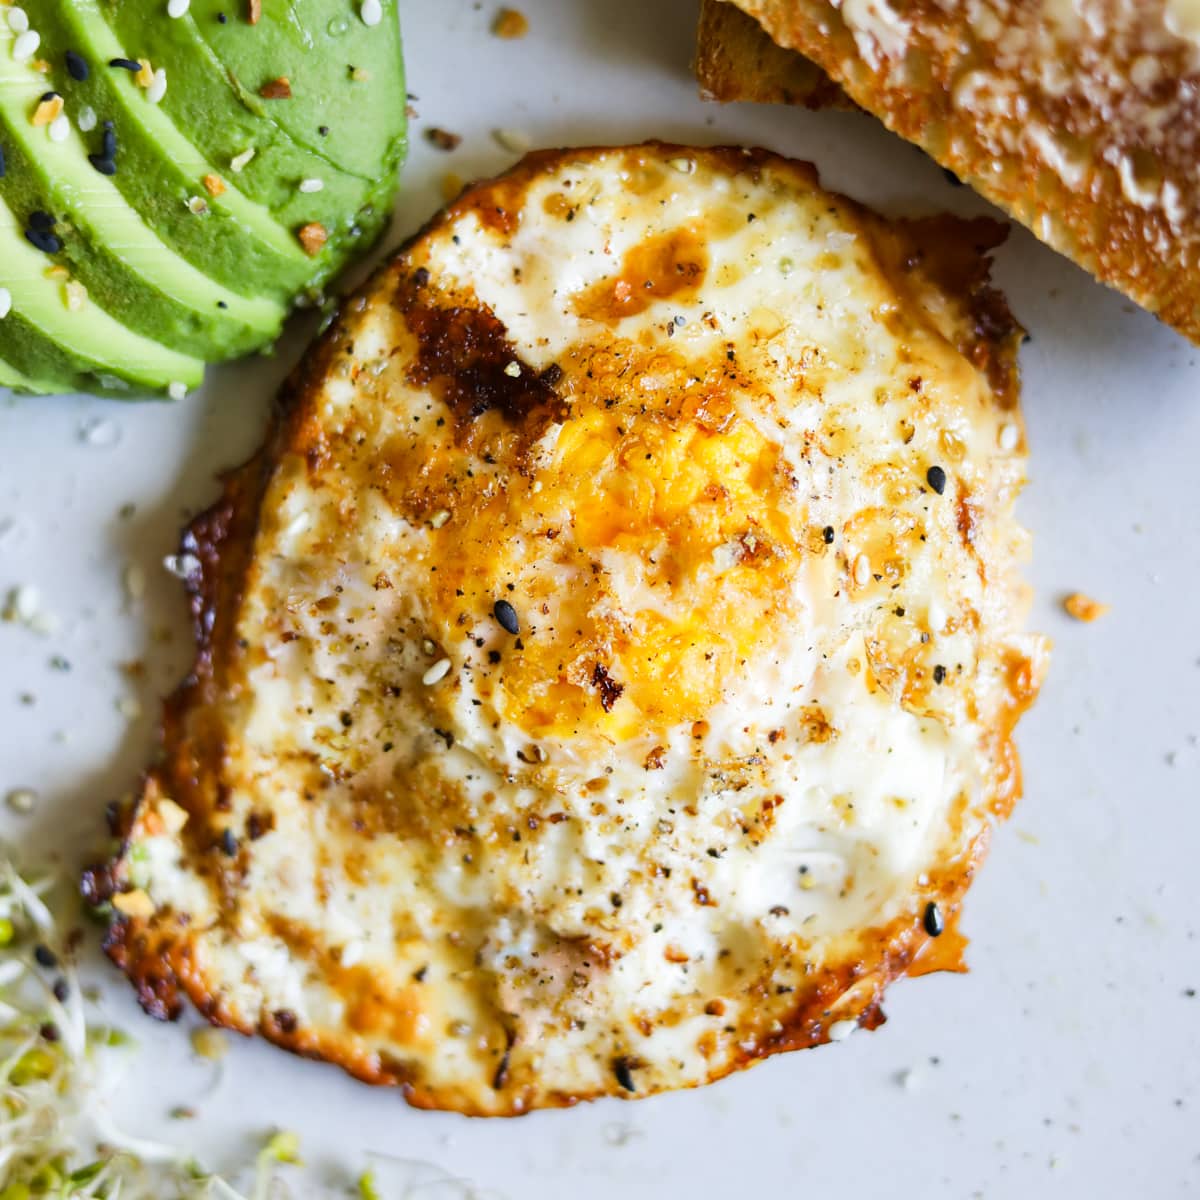 Over hard eggs with butter, salt, and pepper on a plate with avocado, toast, and sprouts.